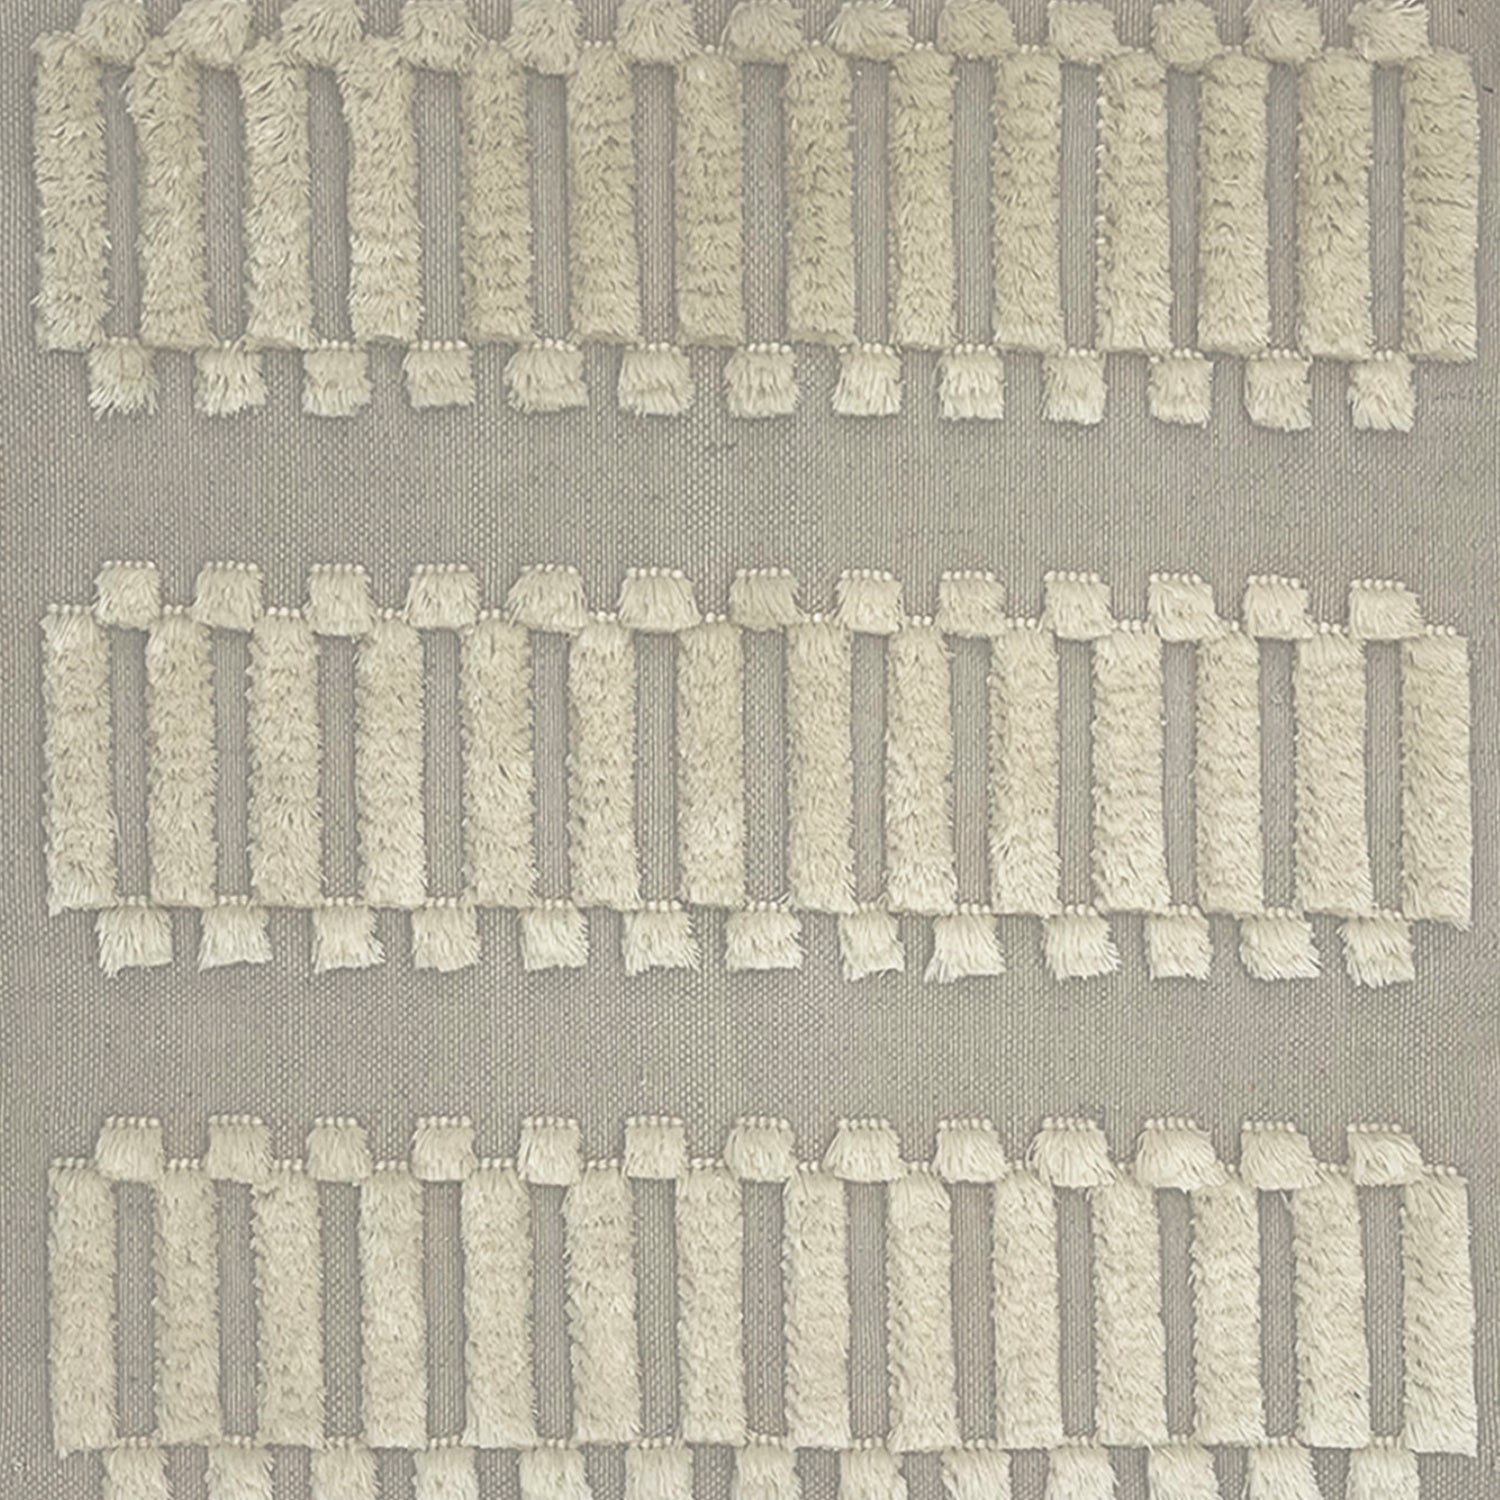 Woven rug swatch with a repeating pattern of high-pile fringed stripes in cream on a gray field.